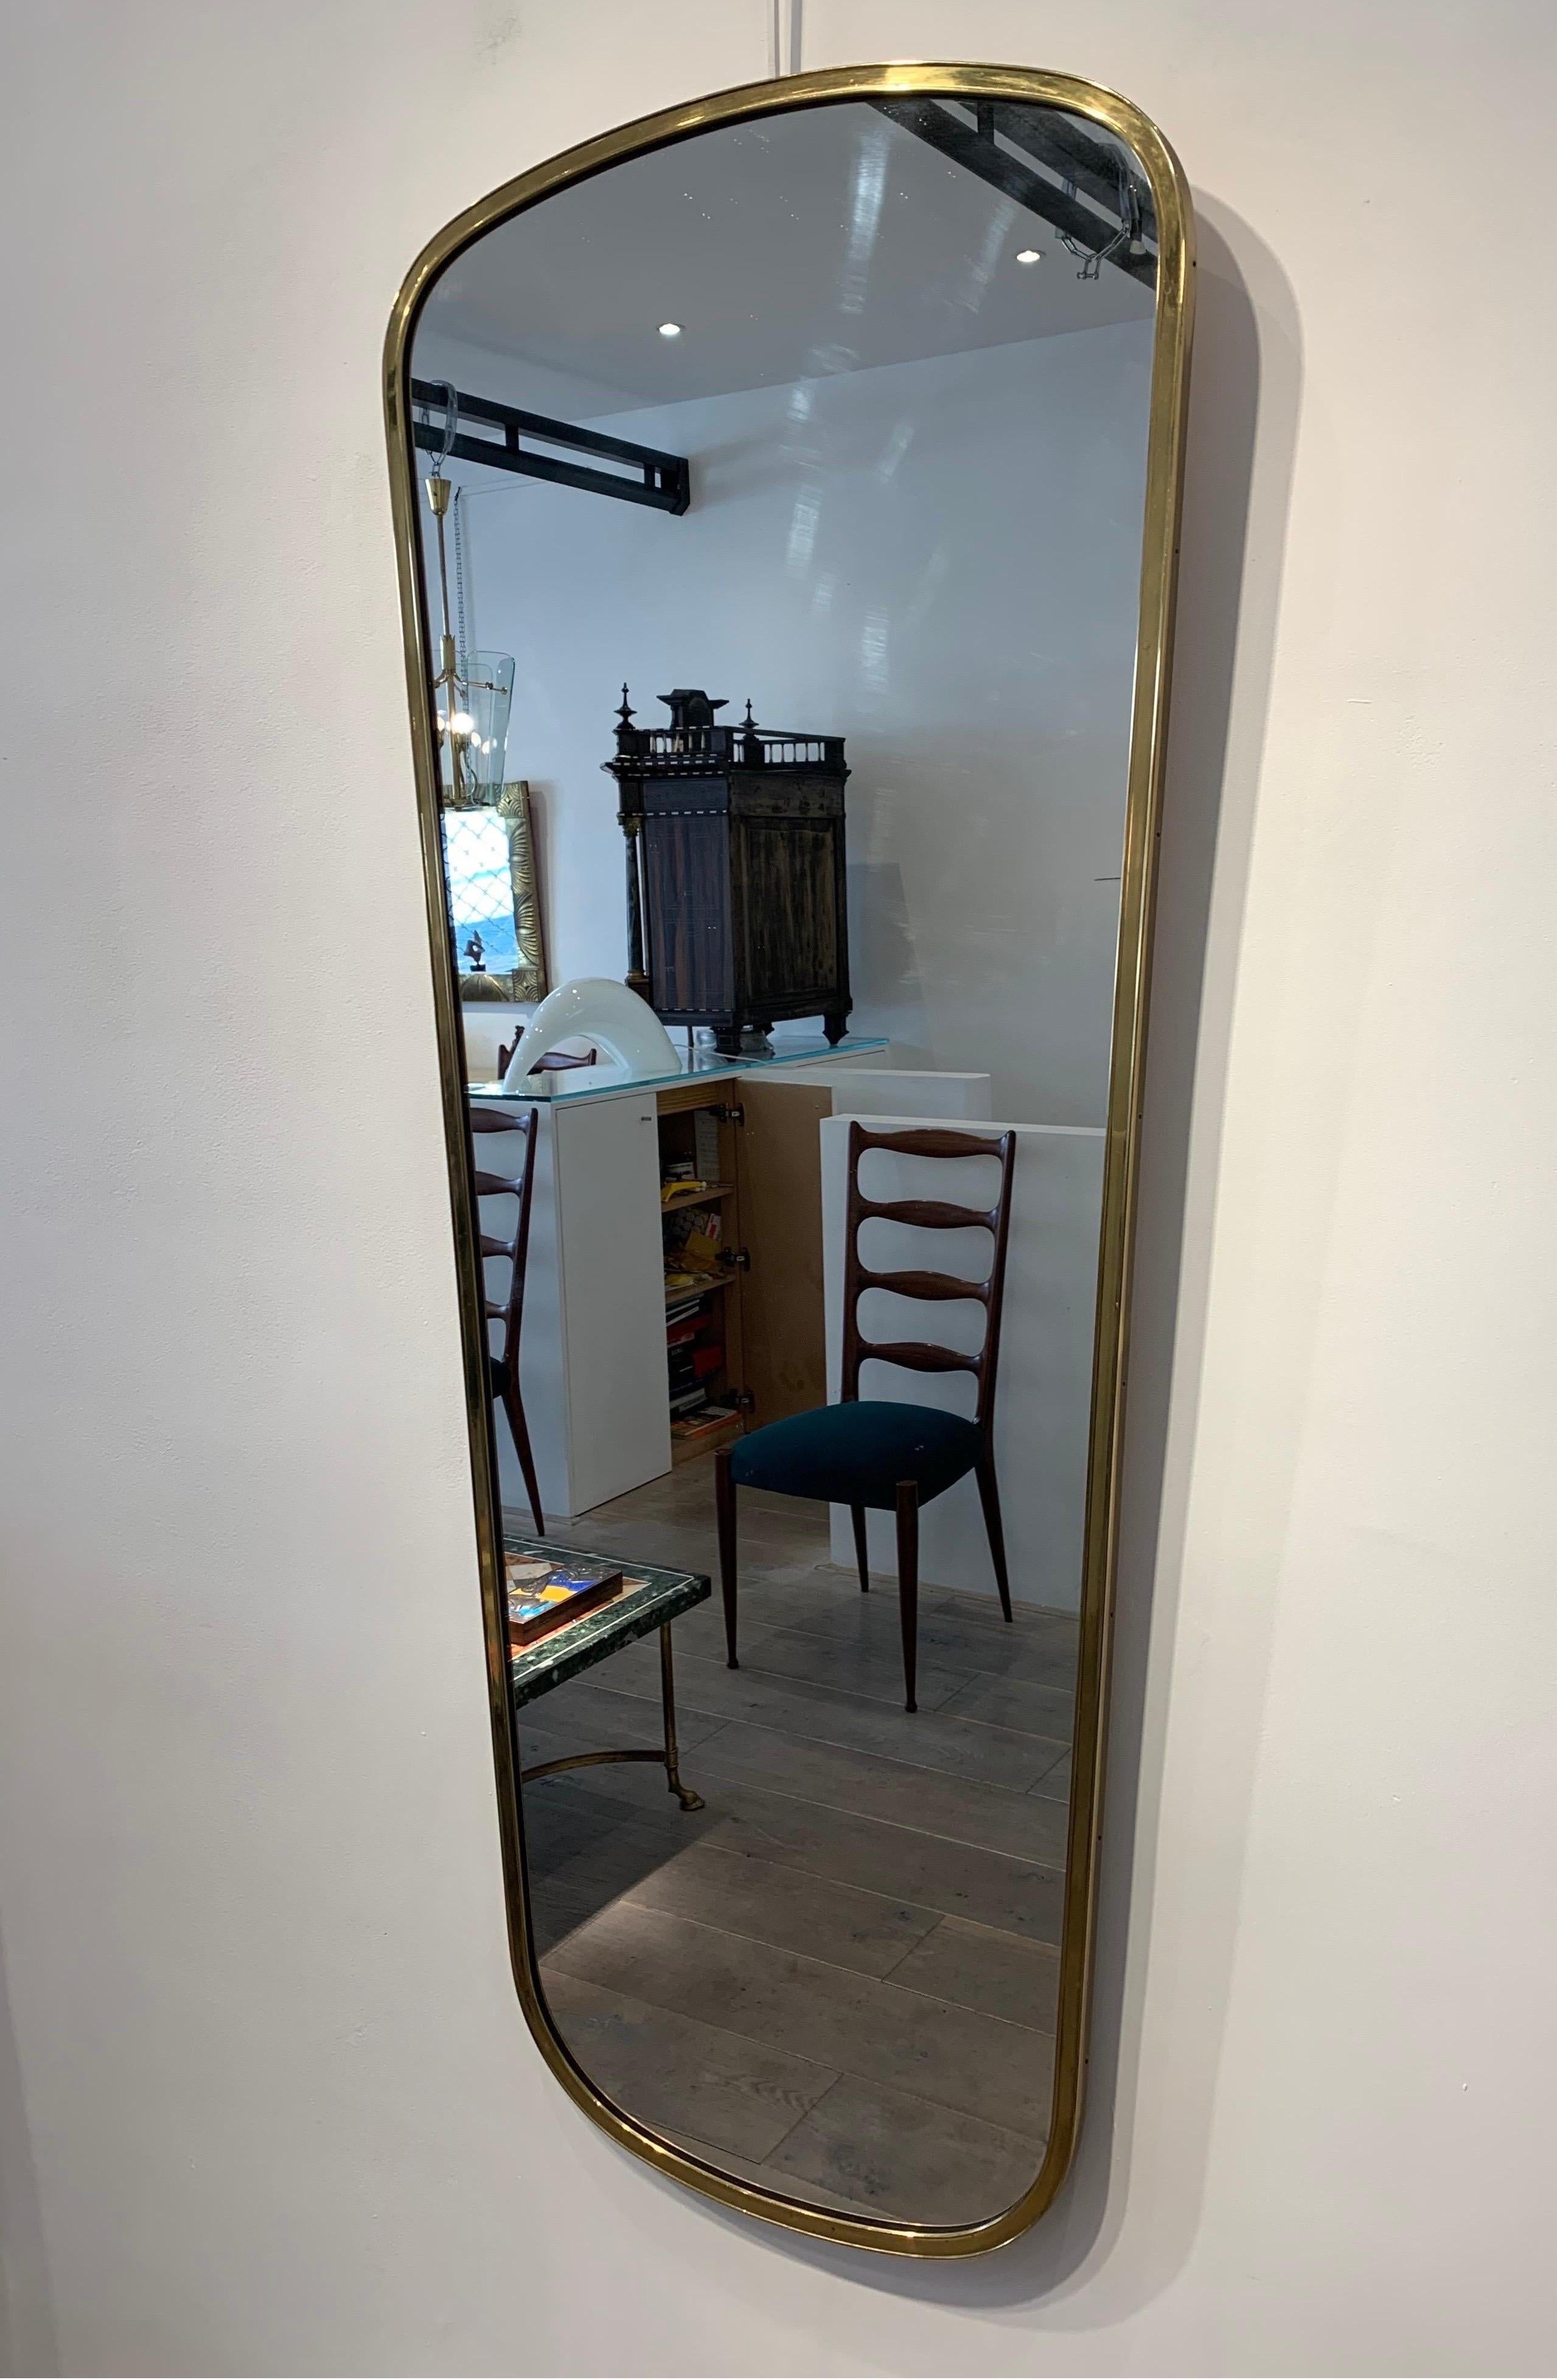 The mirror is the style of Gio Ponti mirror. It has its beautiful patina of the time. The size is larger than usual mirror f of this type with a height of 135cm.